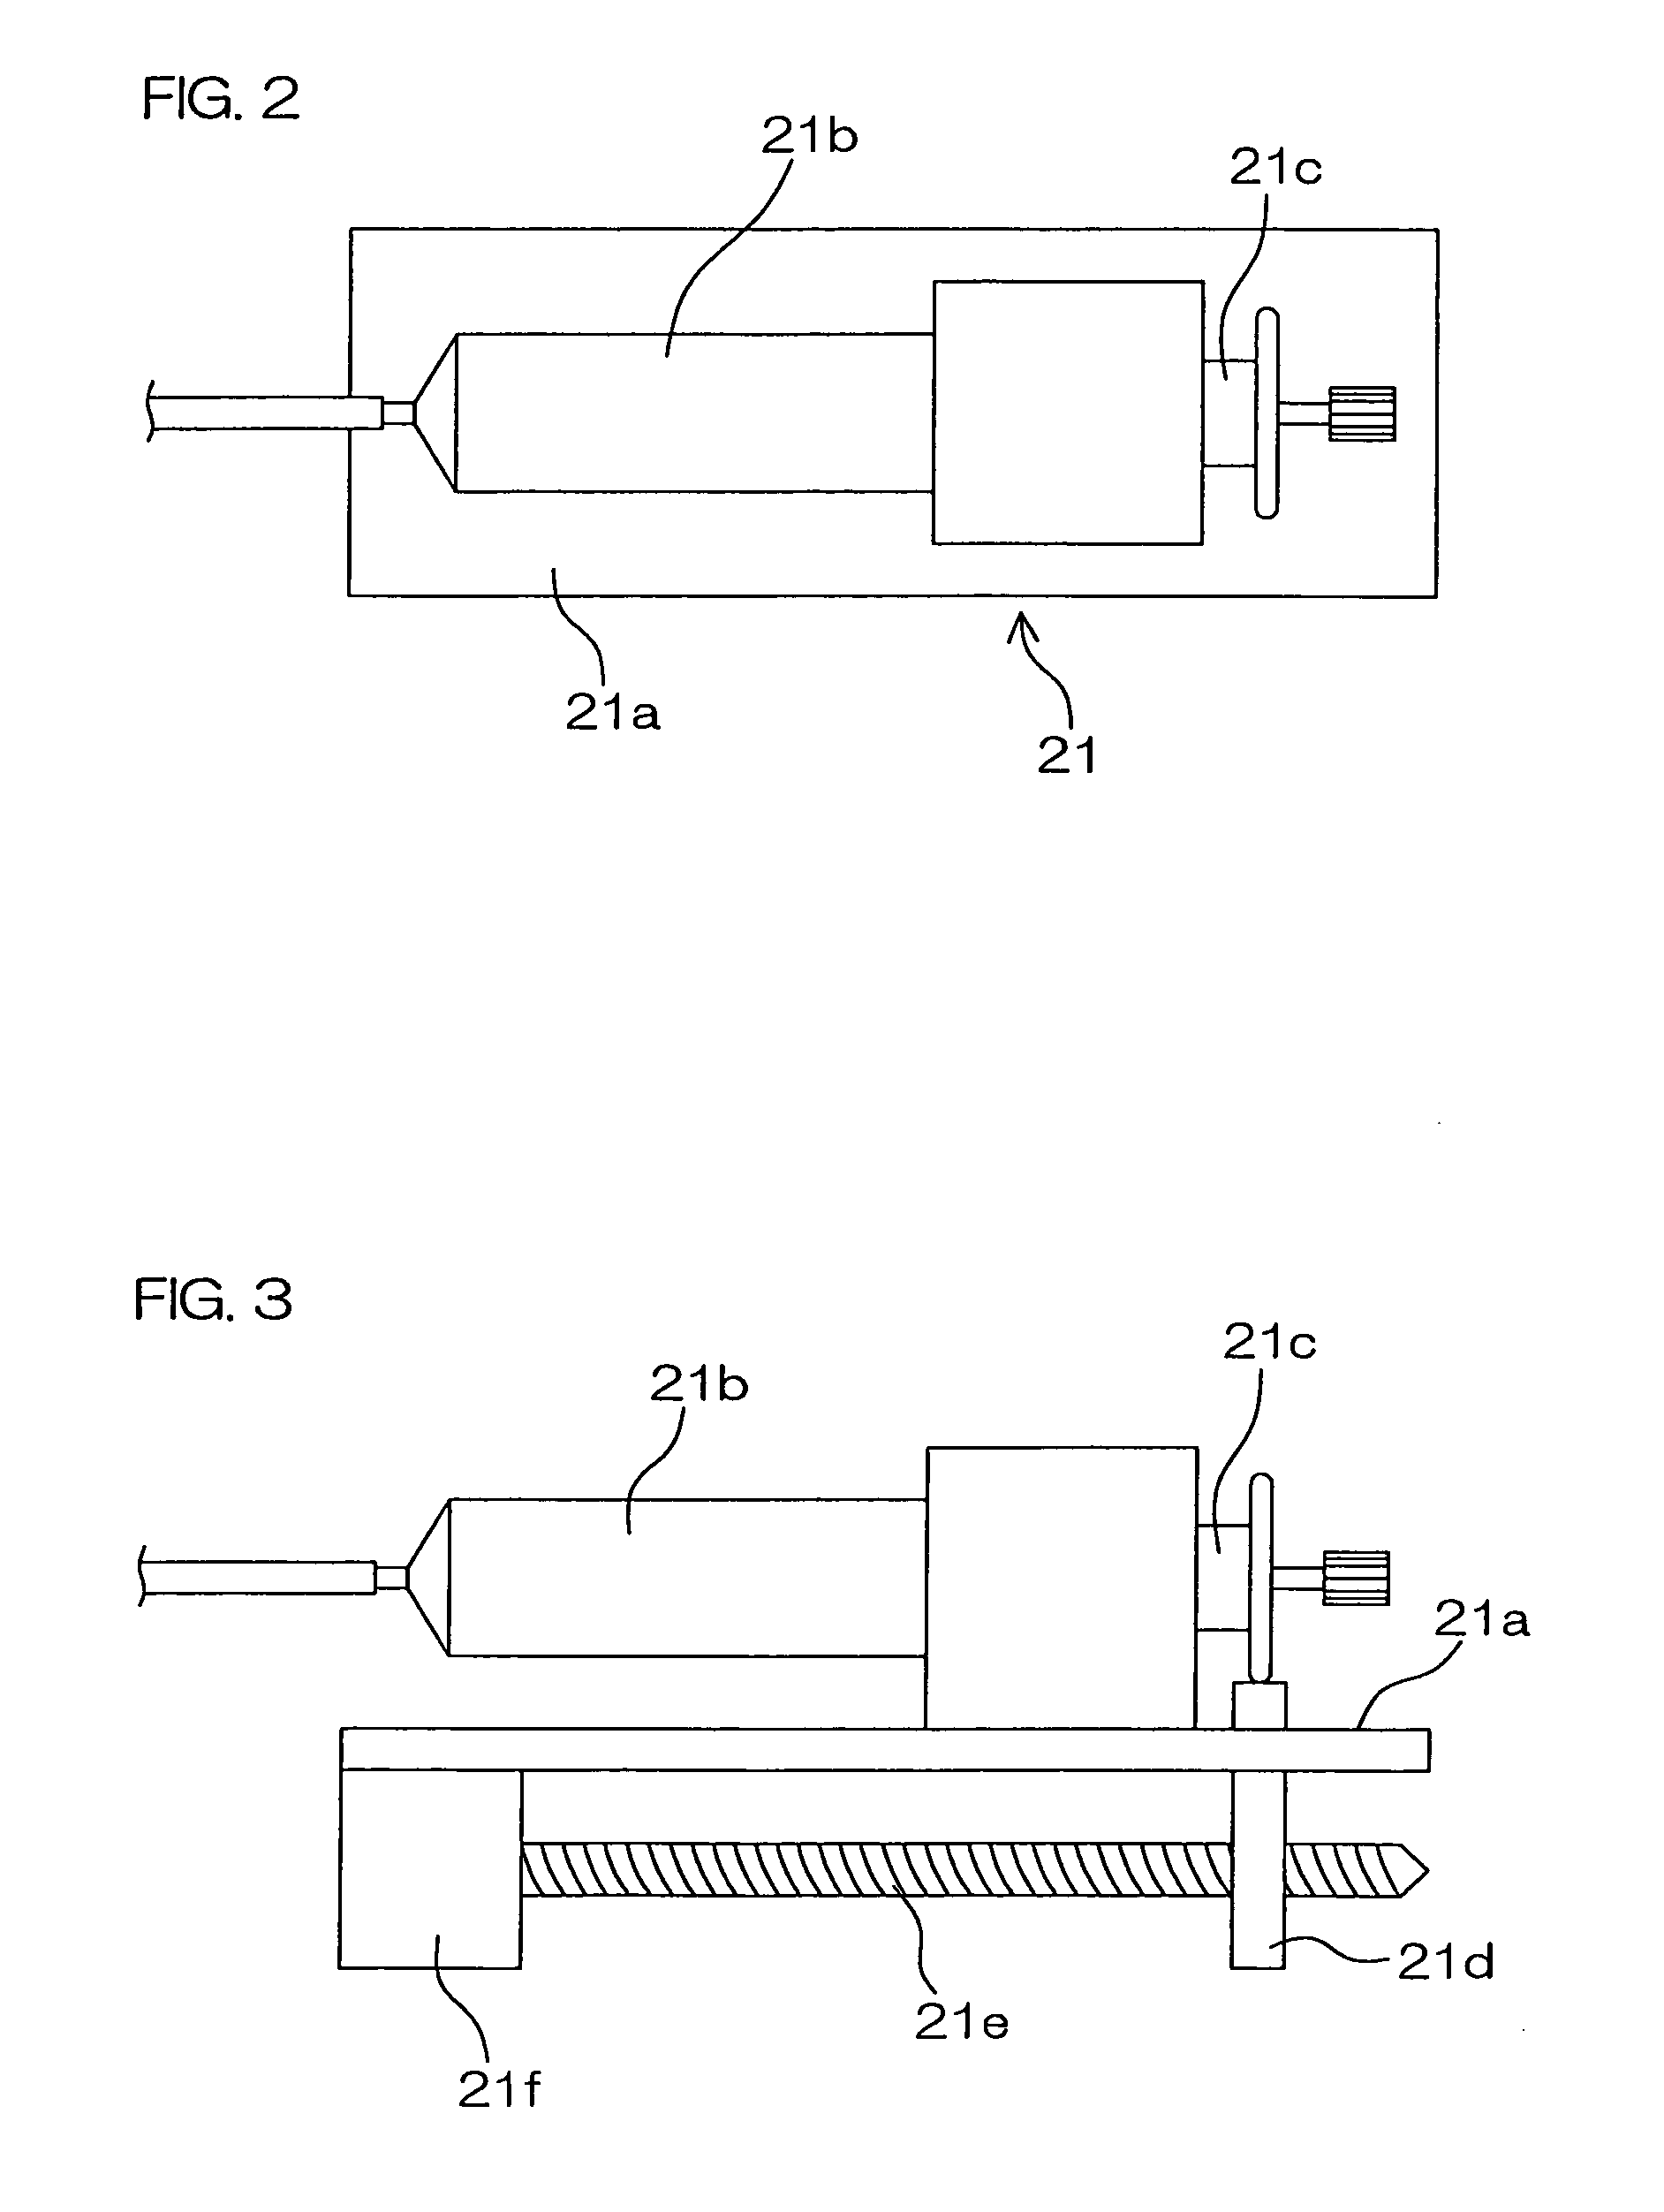 Method of Exhaled Gas Measurement and Analysis and Apparatus Therefor